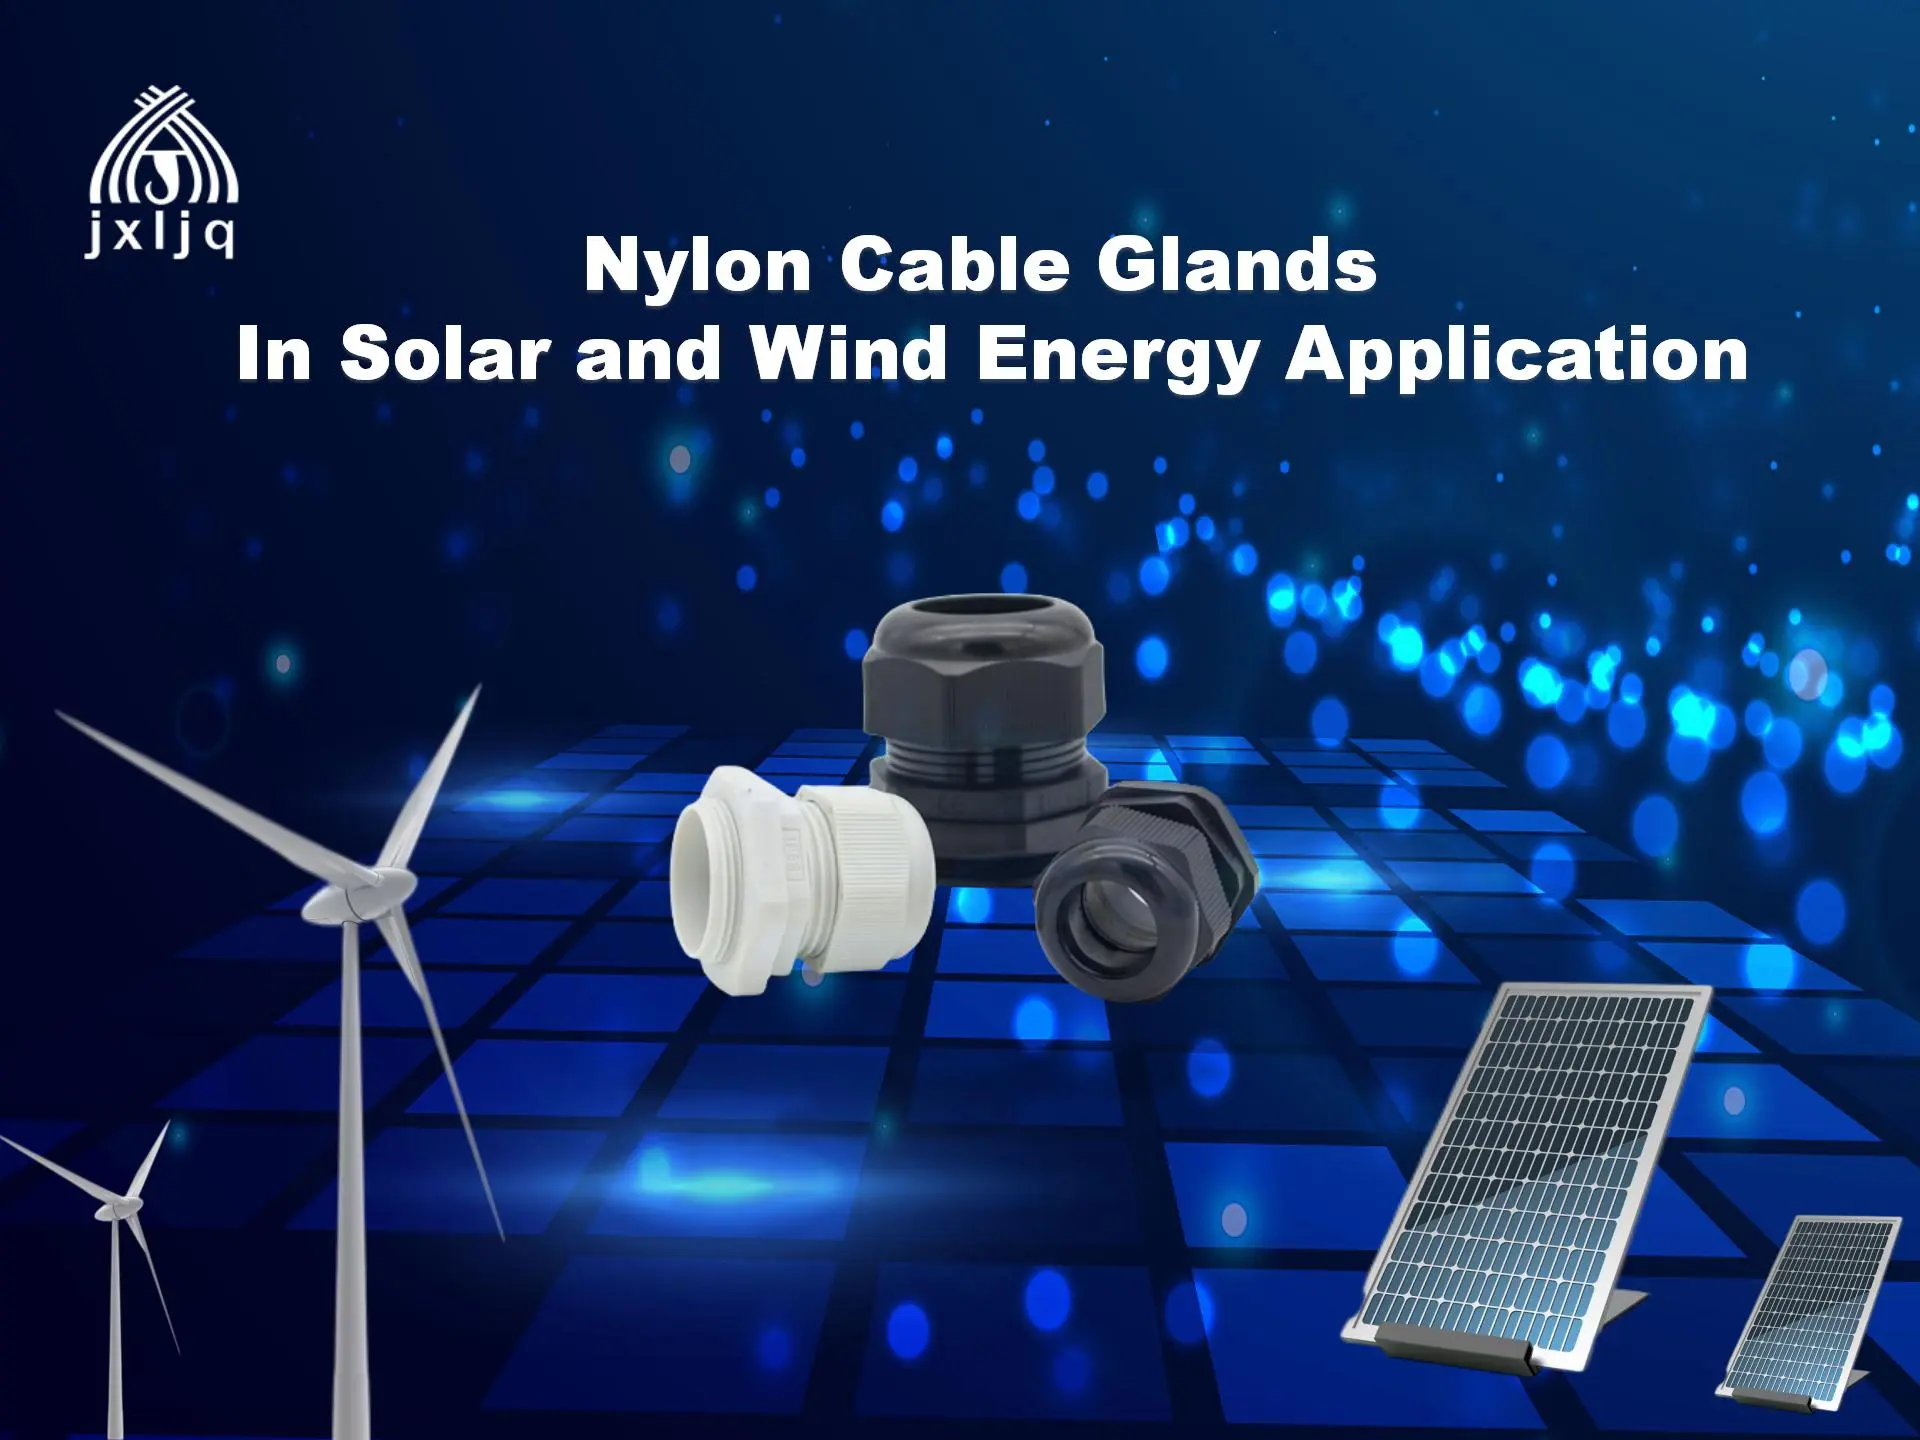 Nylon Cable Glands in Solar and Wind Energy Application